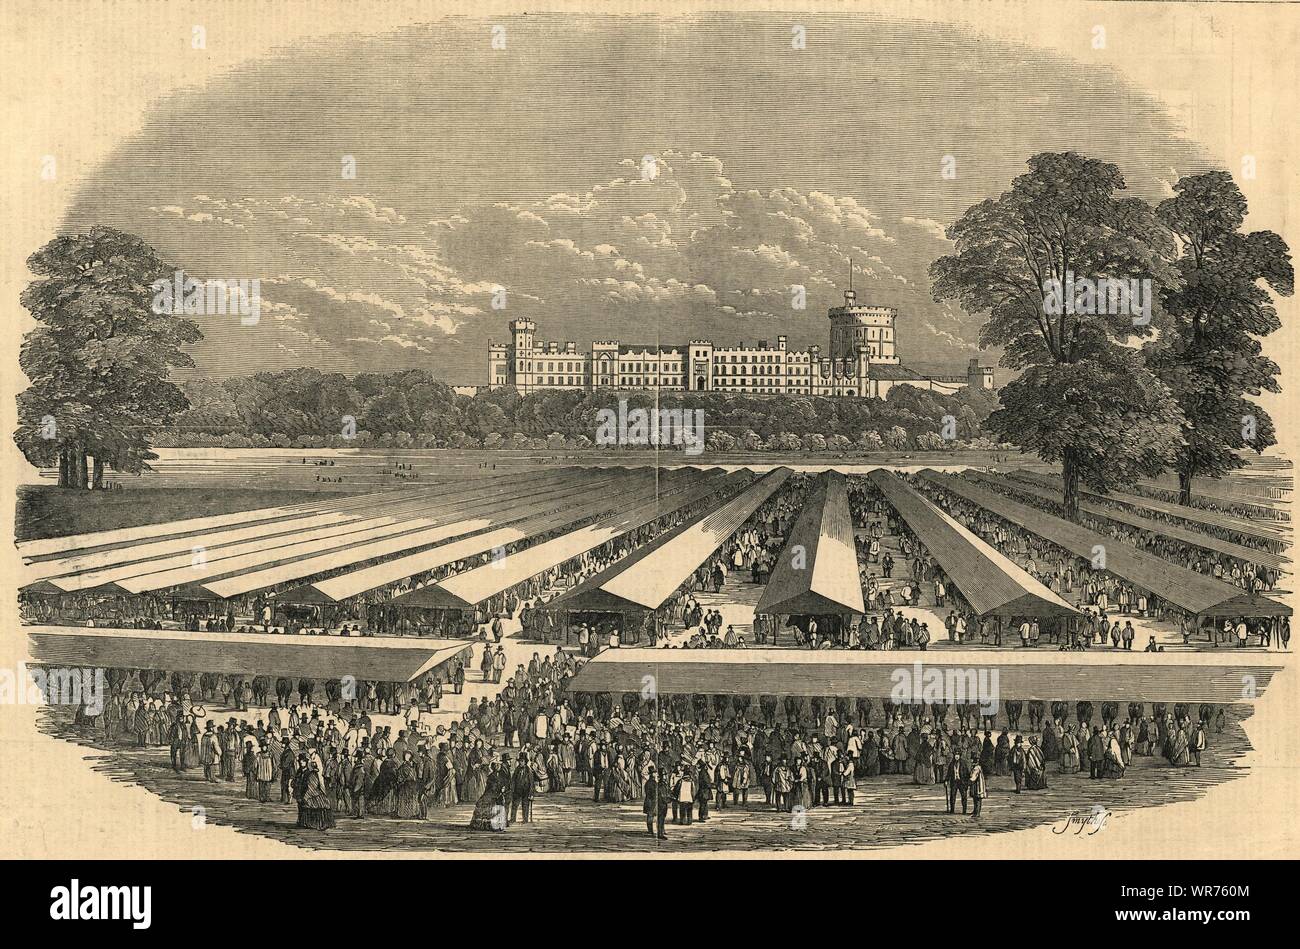 Royal Agricultural Society's meeting at Windsor. Home Park 1851 ILN full page Stock Photo